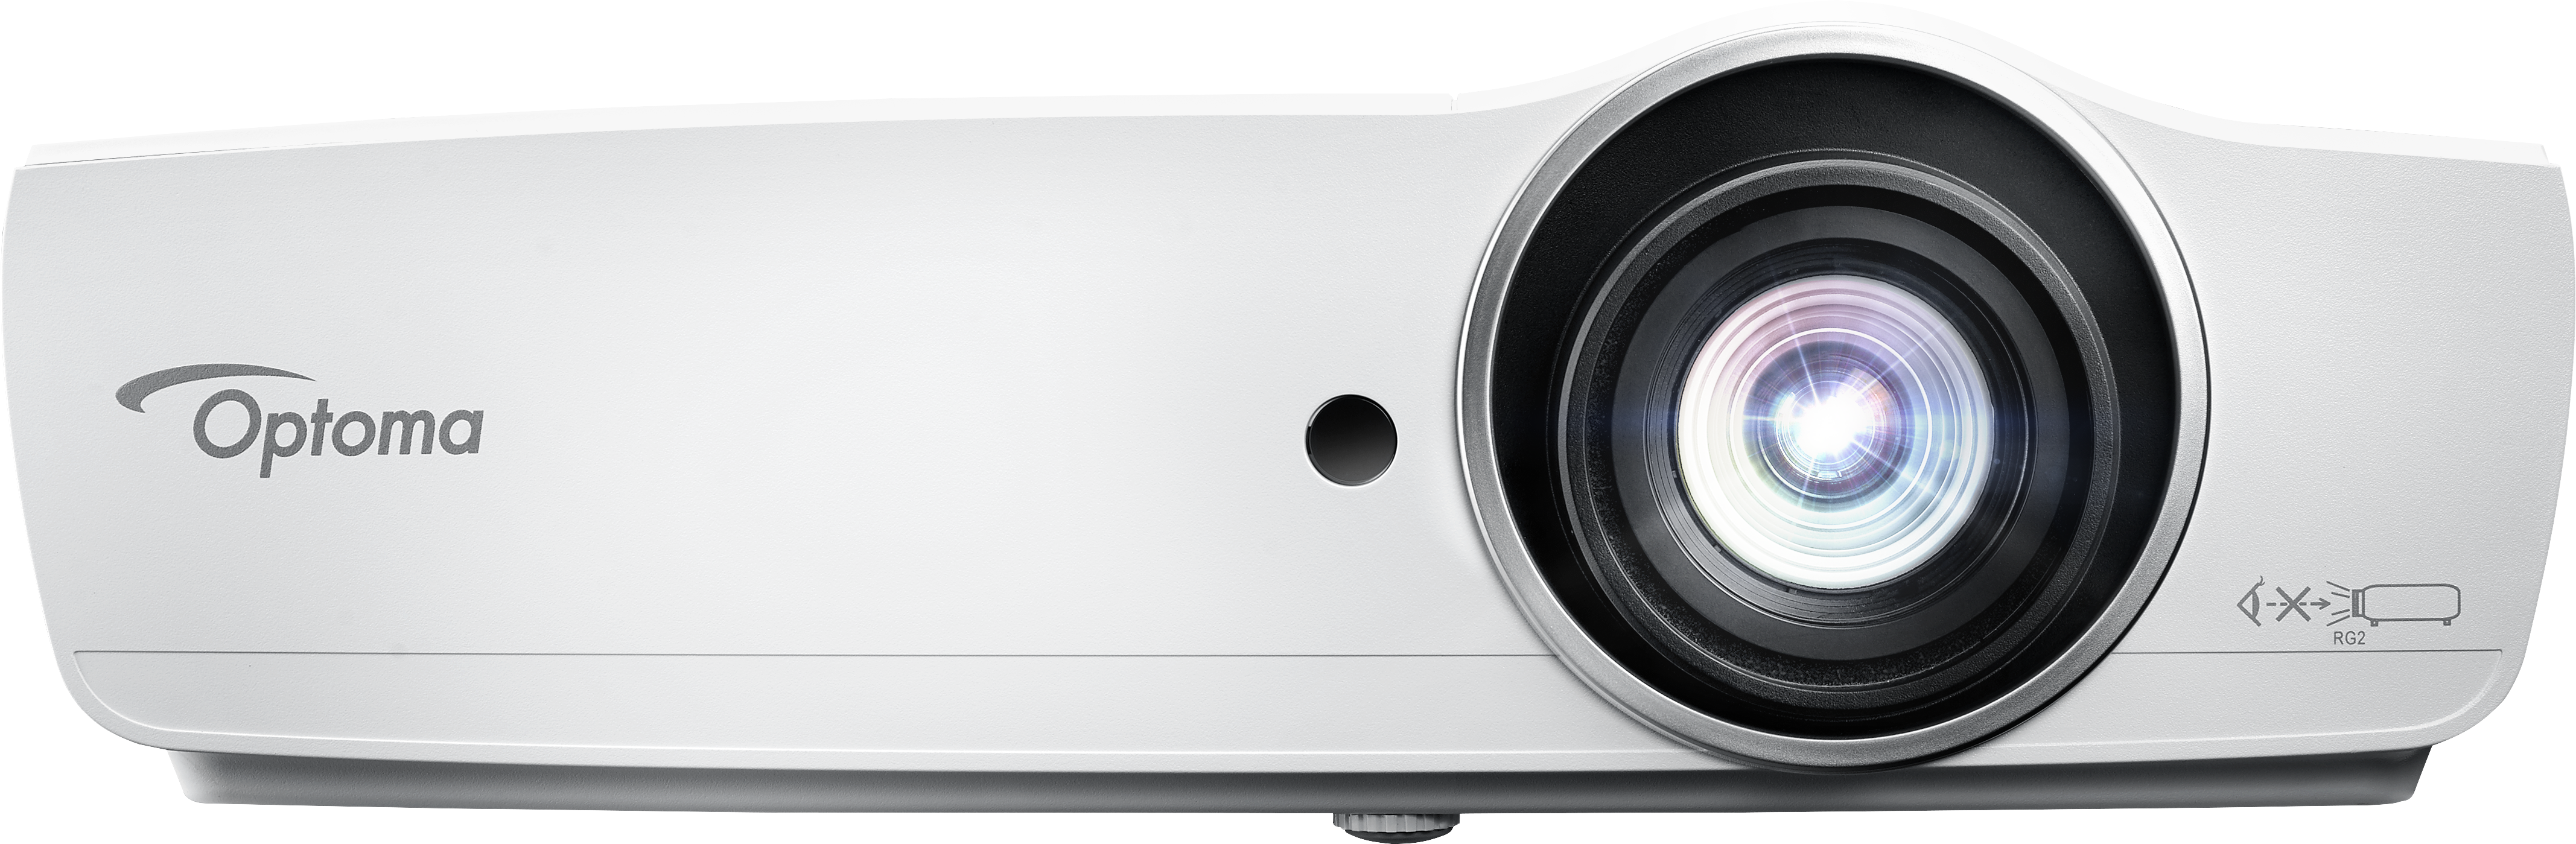 Optoma Projectorwith Lens Flare PNG